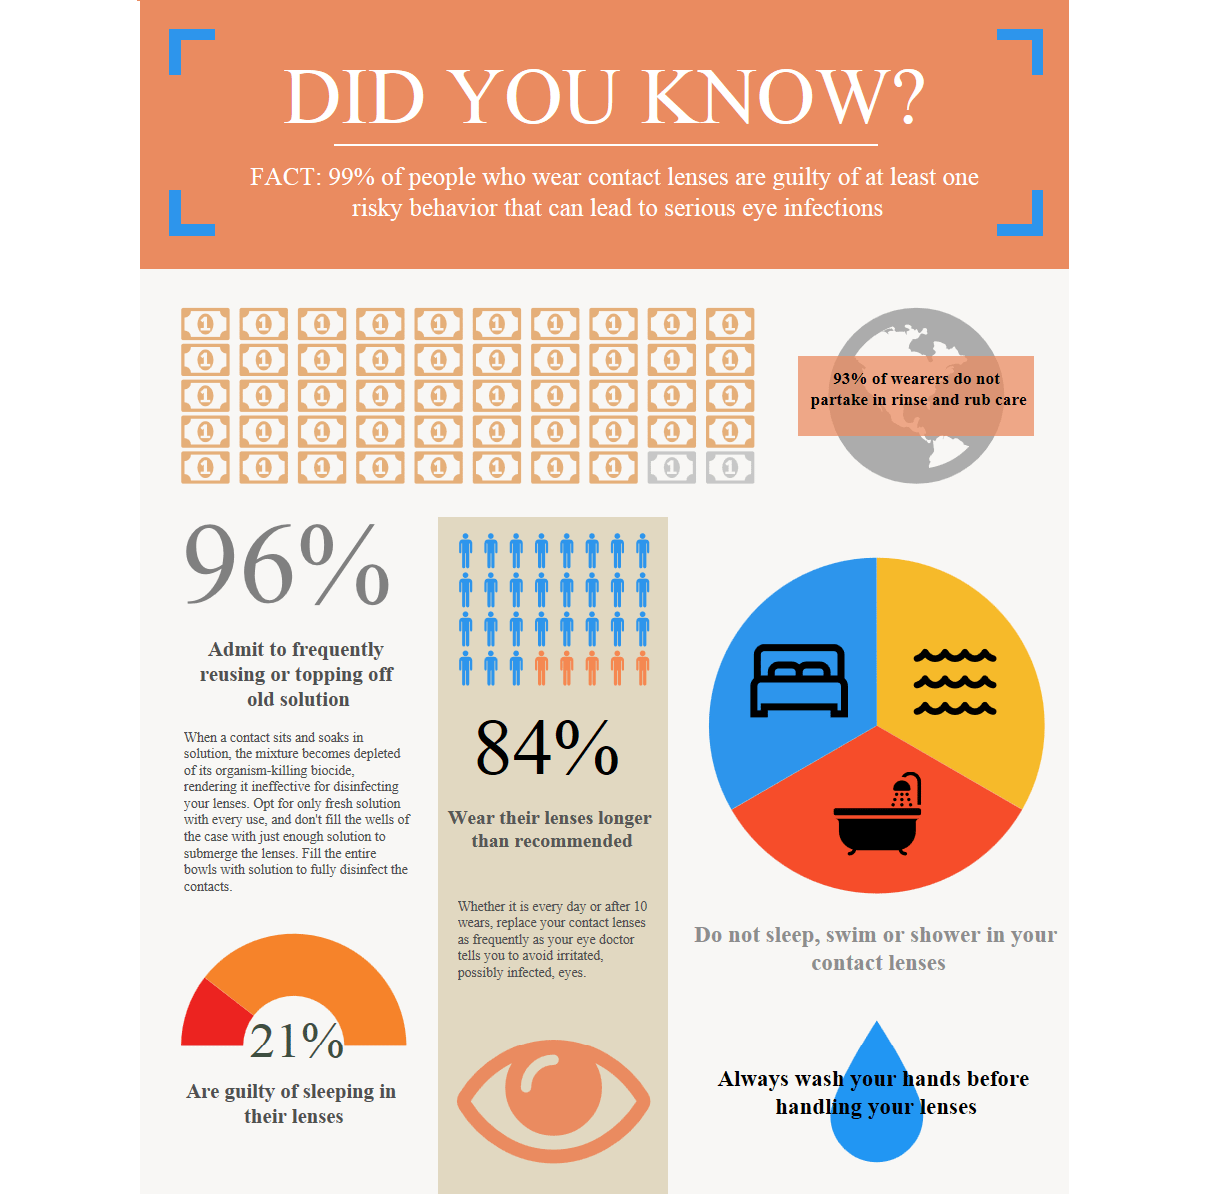 5 Interesting Facts About Contact Lens User Behavior